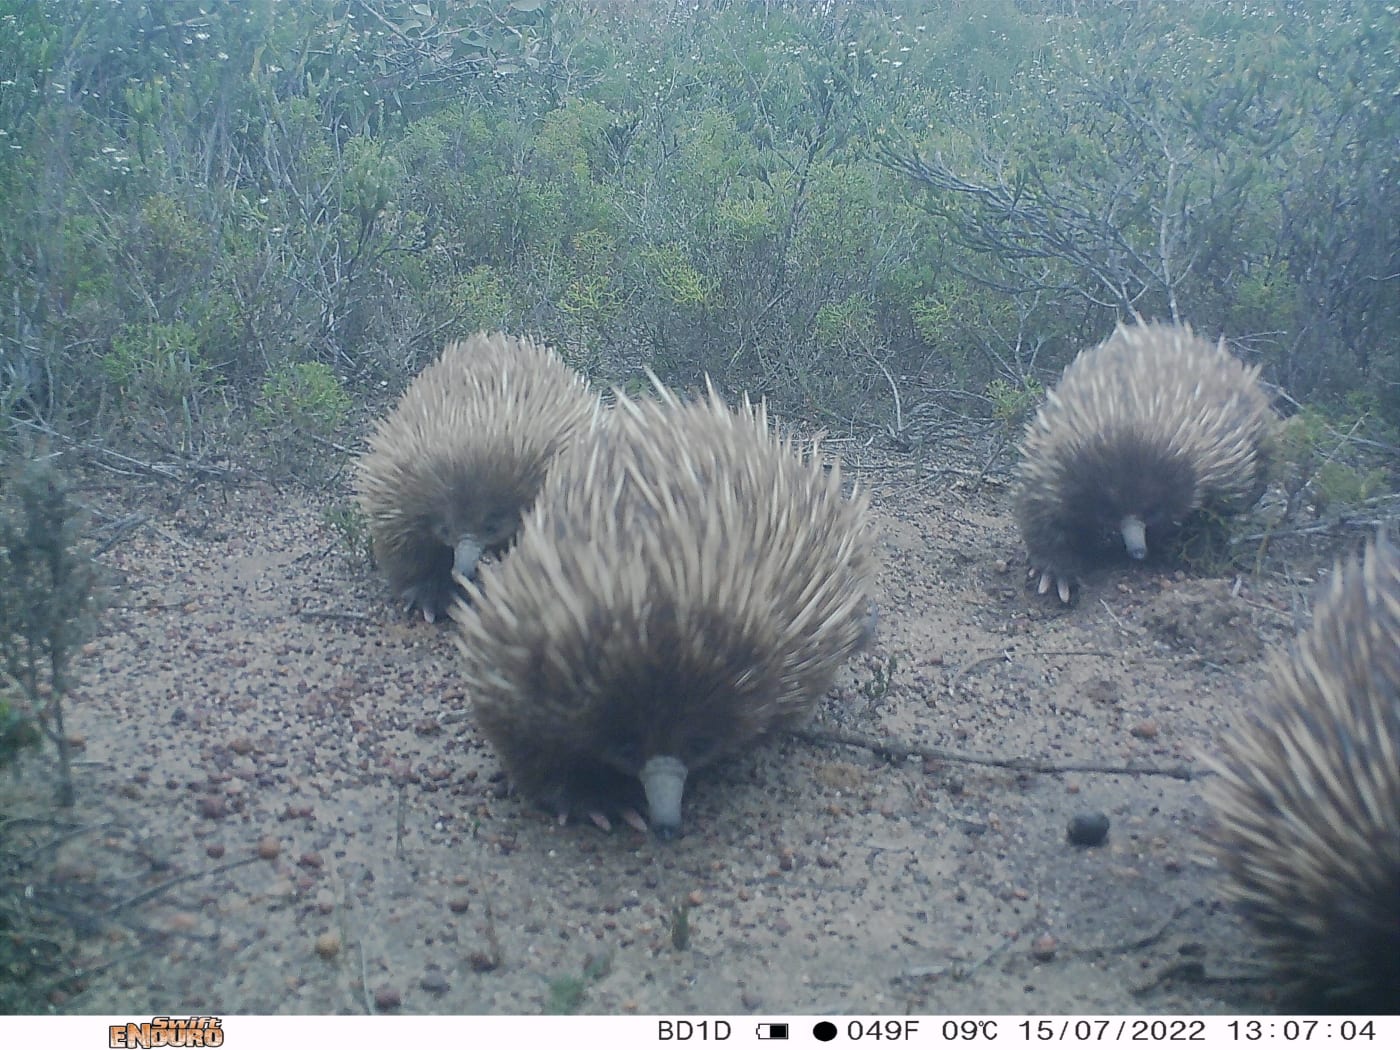 A sensor camera photo showing a train of short-beaked echidnas on Kangaroo Island, taken as part of the Eyes on Recovery project.

Eyes on Recovery is a large-scale sensor camera project. and a collaboration between WWF, Conservation International, and local land managers and research organisations. Google-powered AI technology has been trained to identify Australian animals in photos to track the recovery of threatened species following the 2019-20 bushfires.